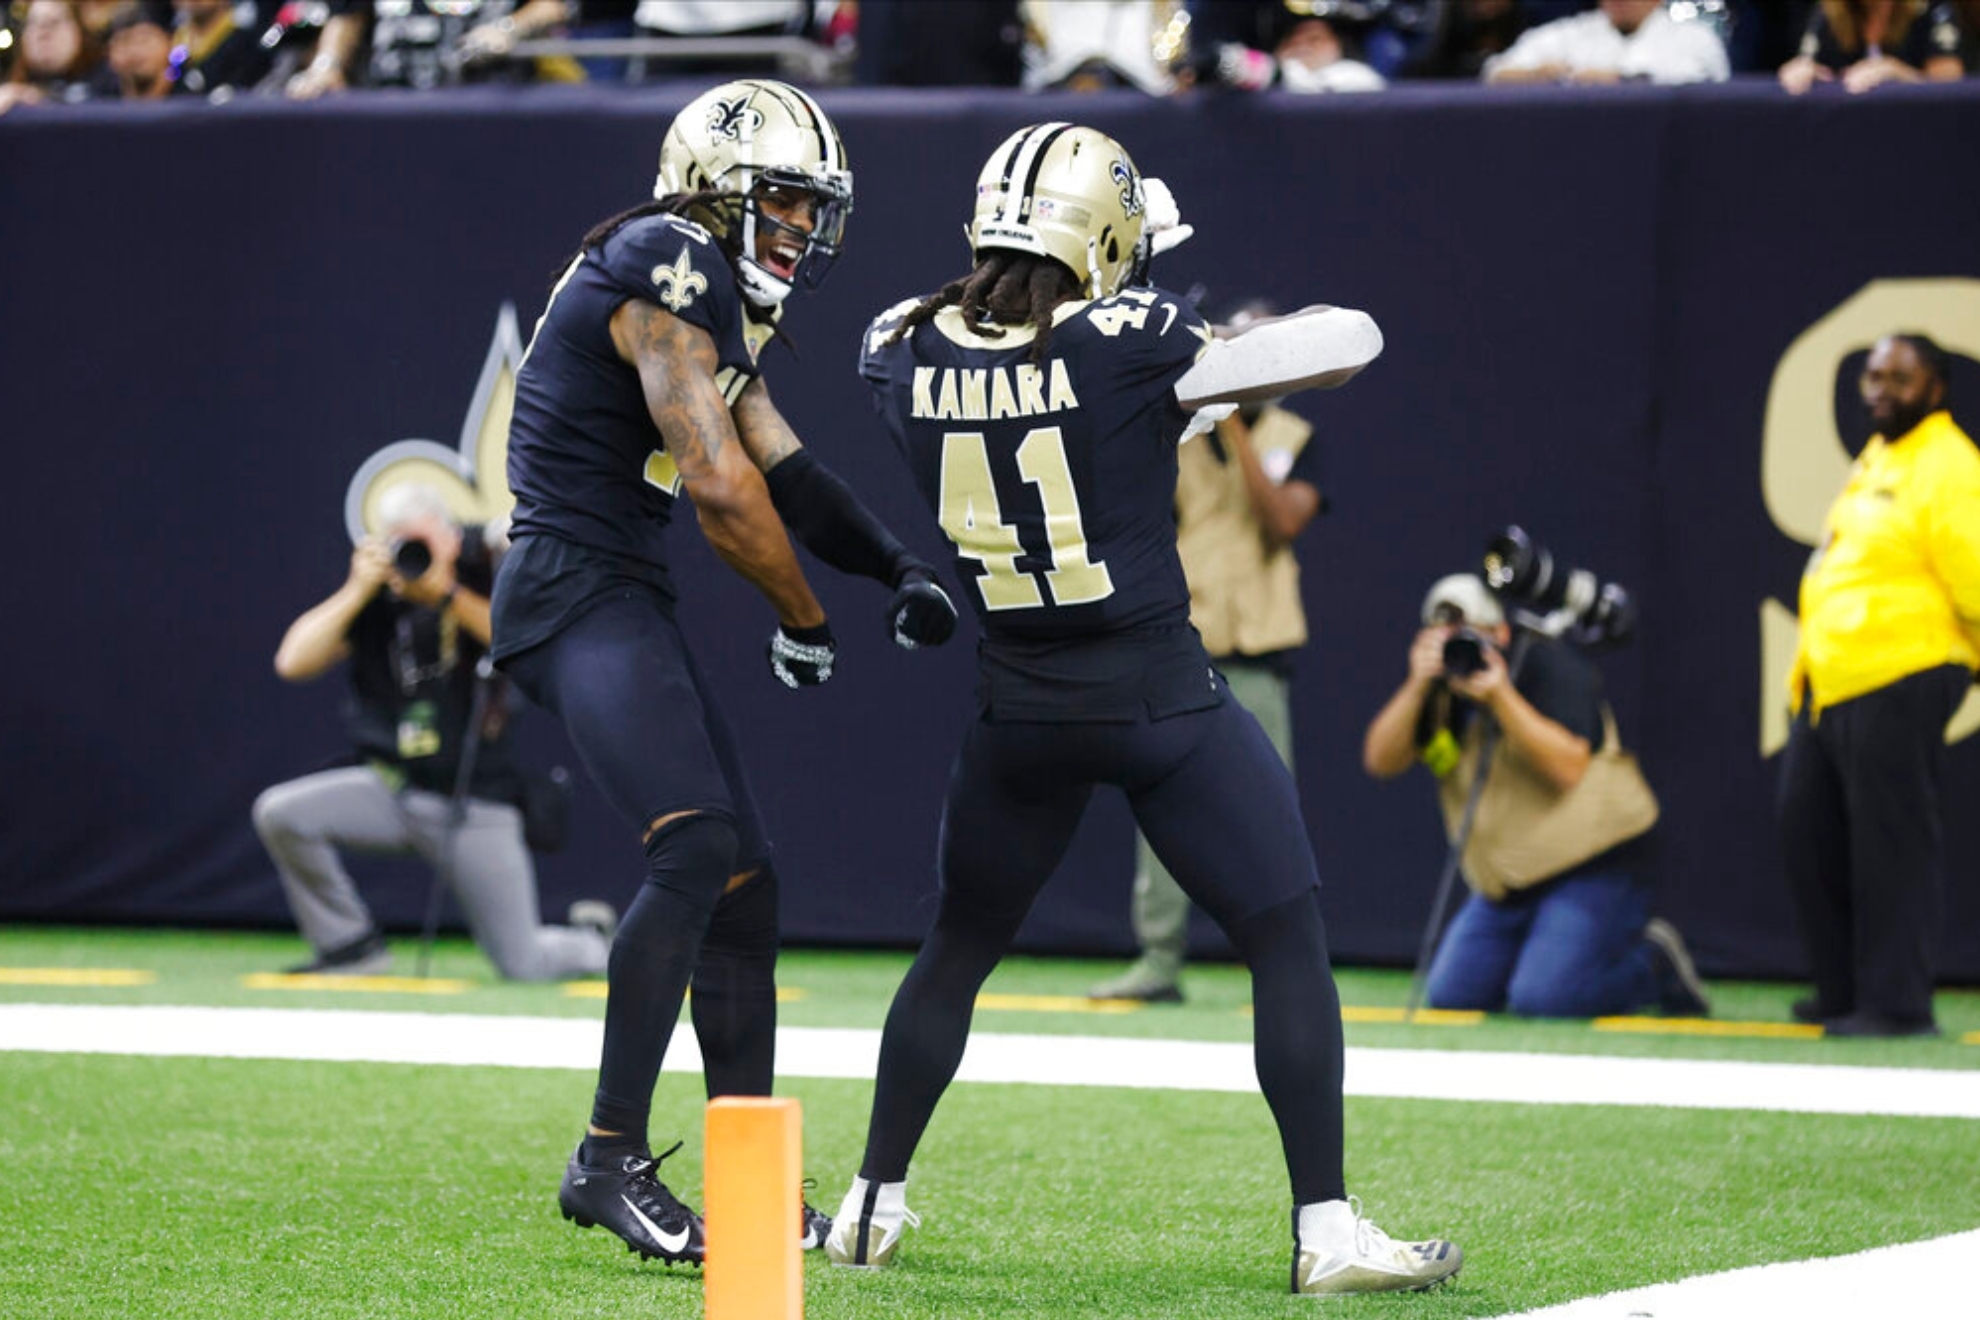 Kamara will look to move past this case and improve on what was a lackluster season